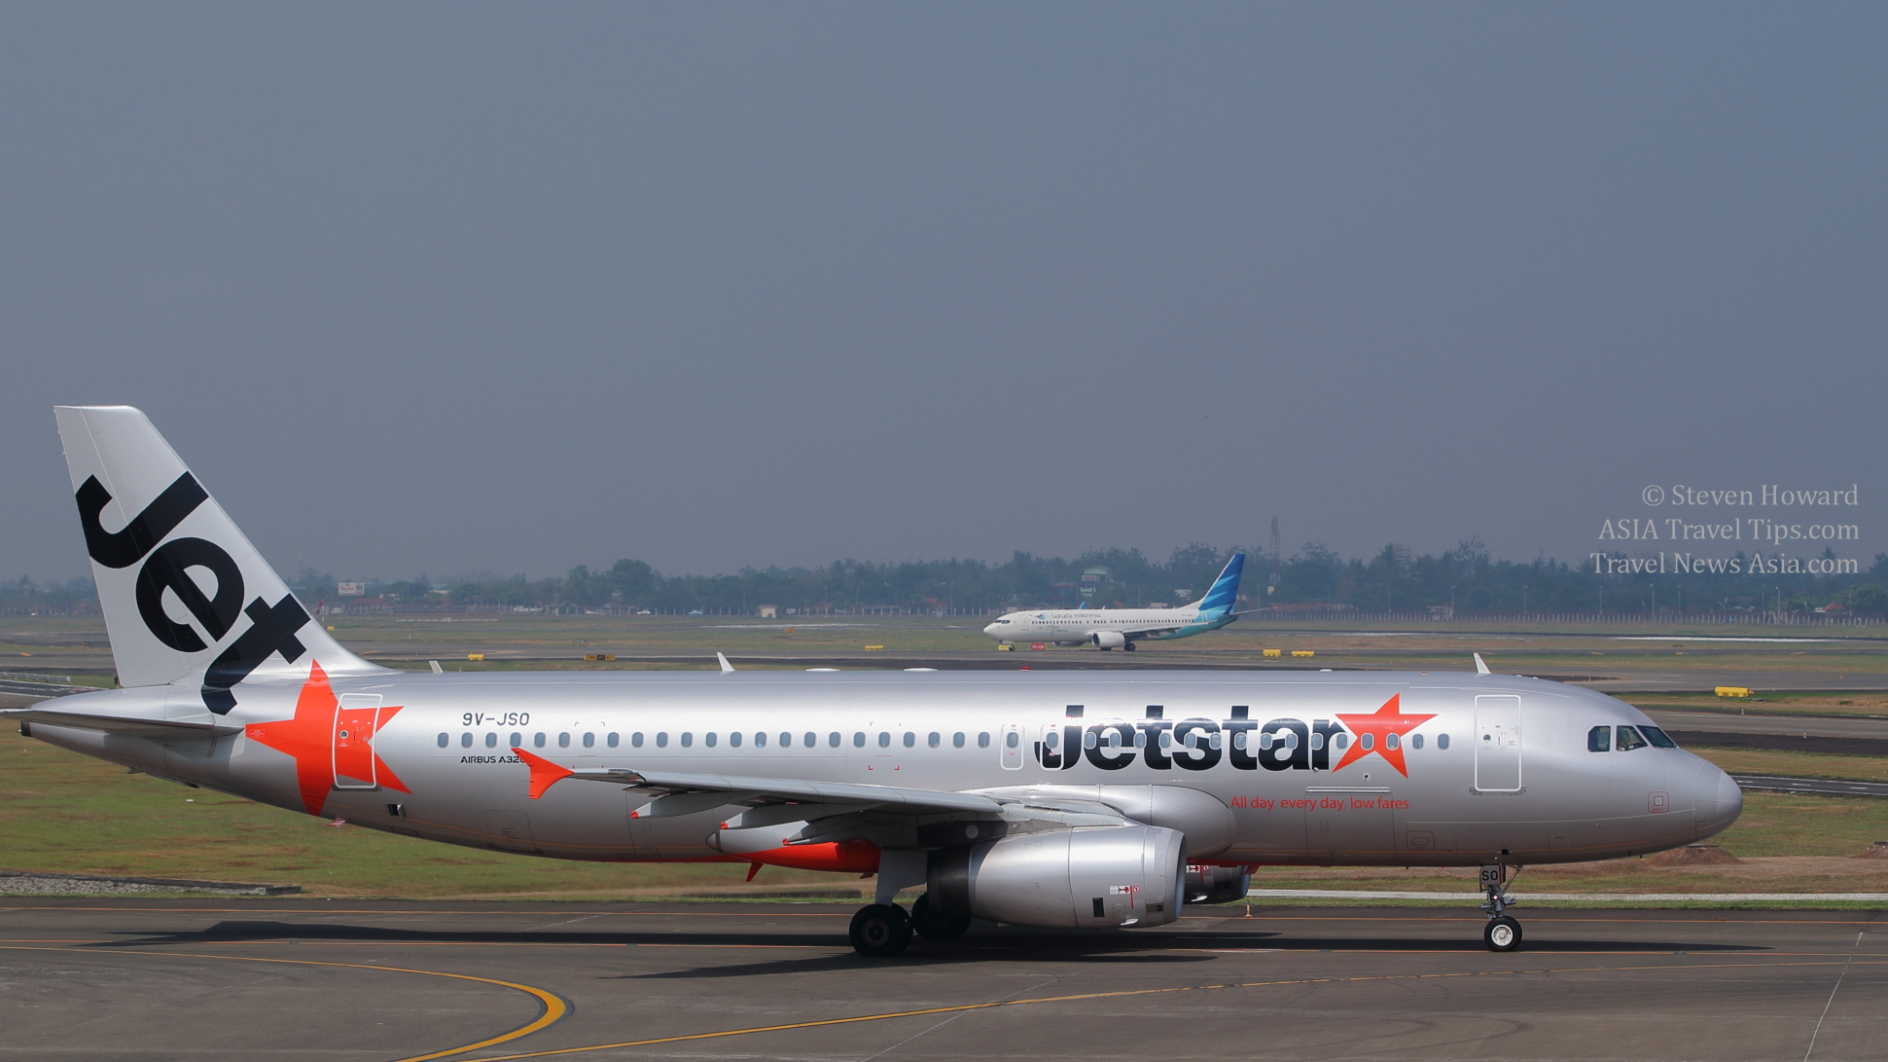 Jetstar Asia Airbus A320 reg: 9V-JSO. Picture by Steven Howard of TravelNewsAsia.com Click to enlarge.